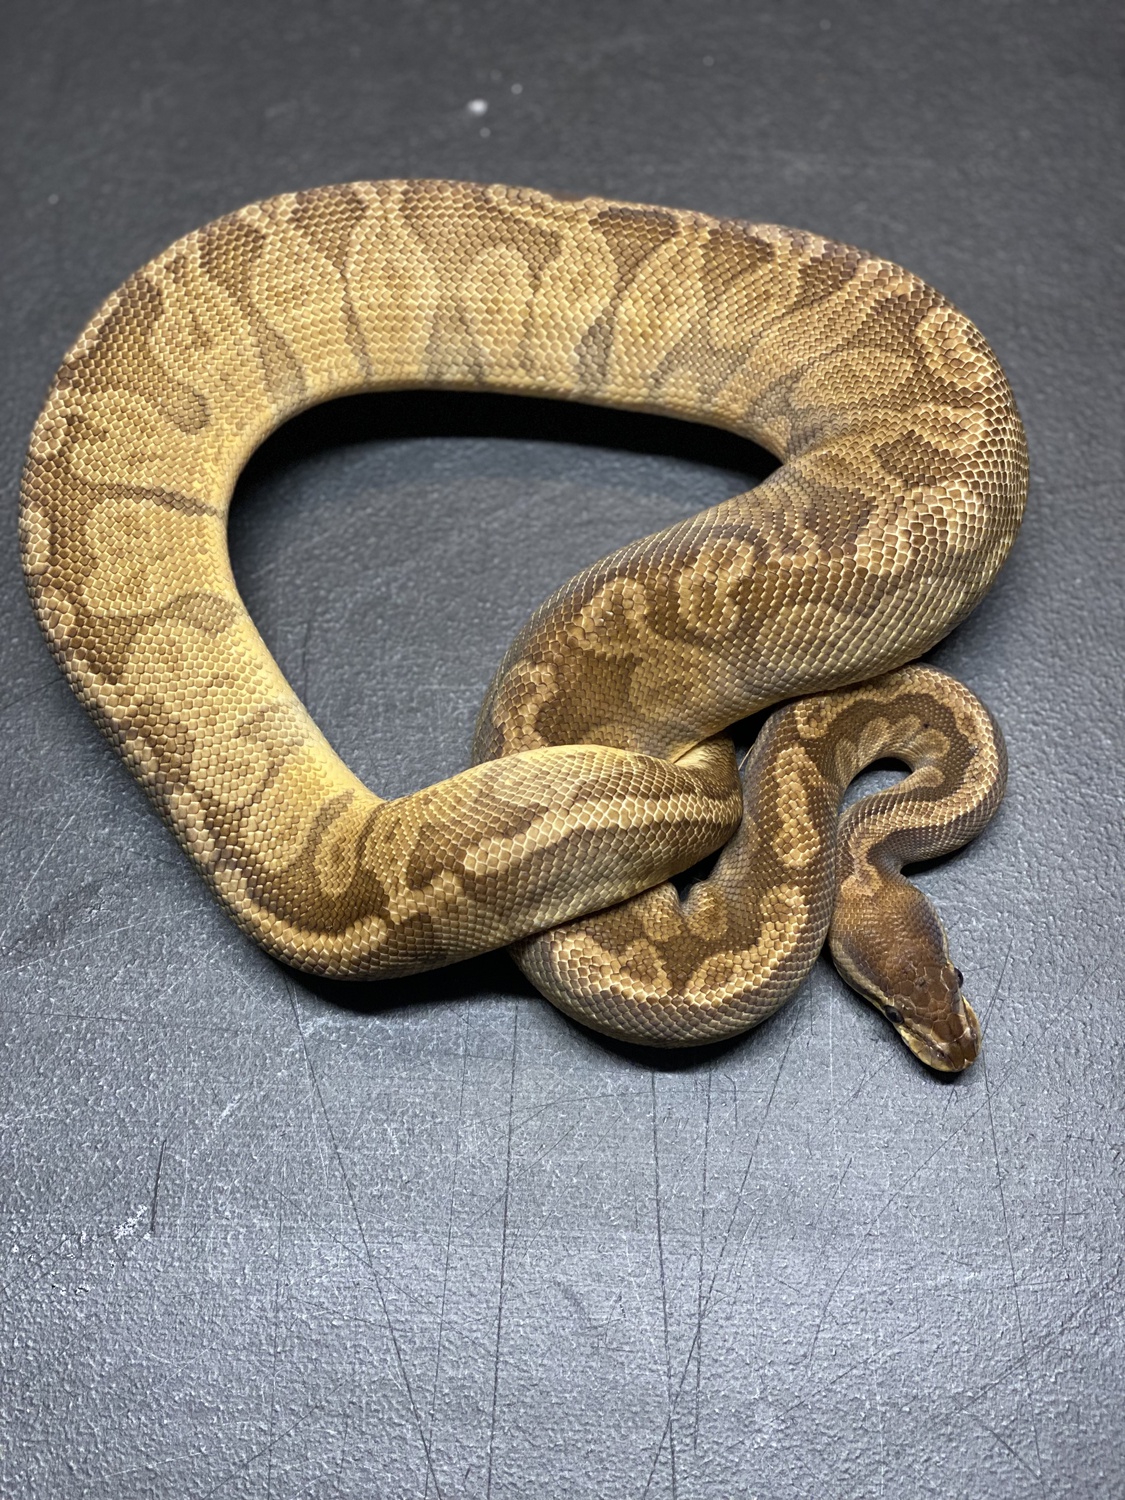 Sunset Ball Python by Bearded Brothers Exotics